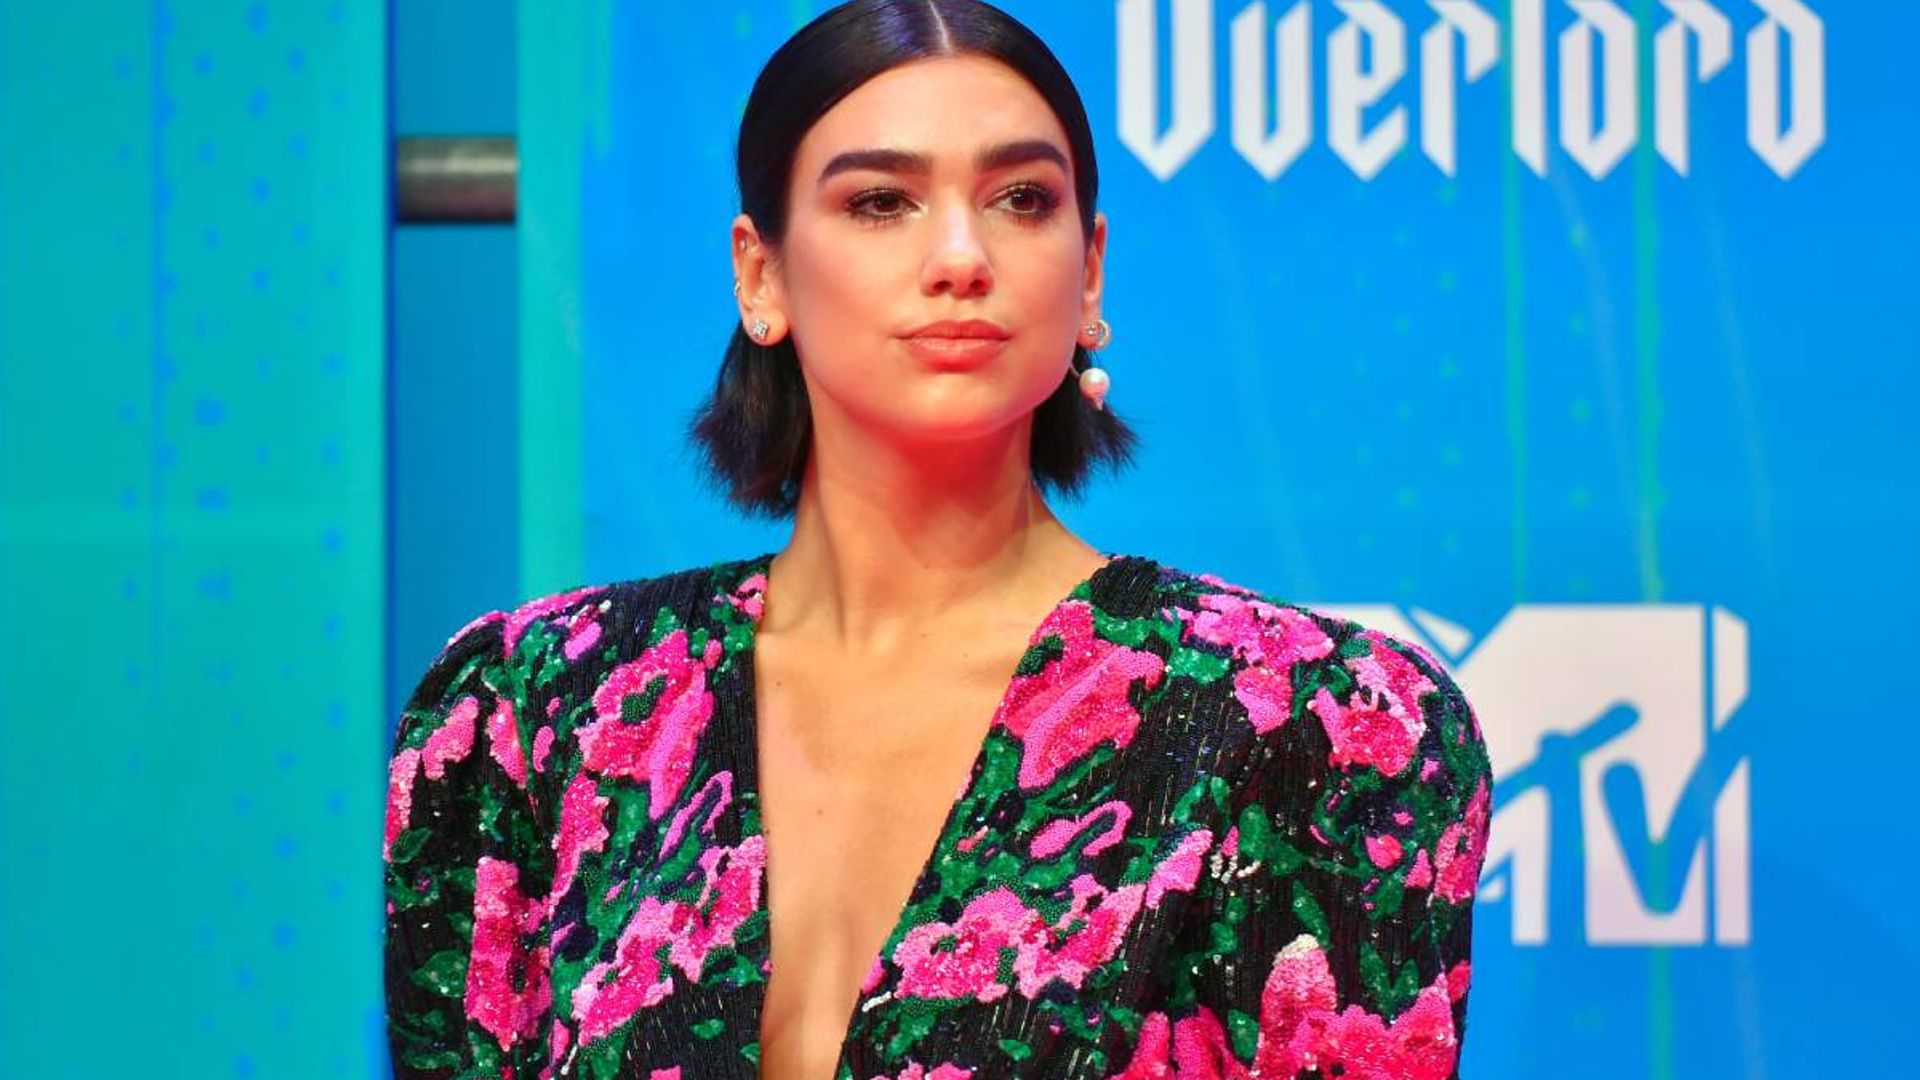 Dua Lipa turns heads in a lace-up top - and wait until you see her pants